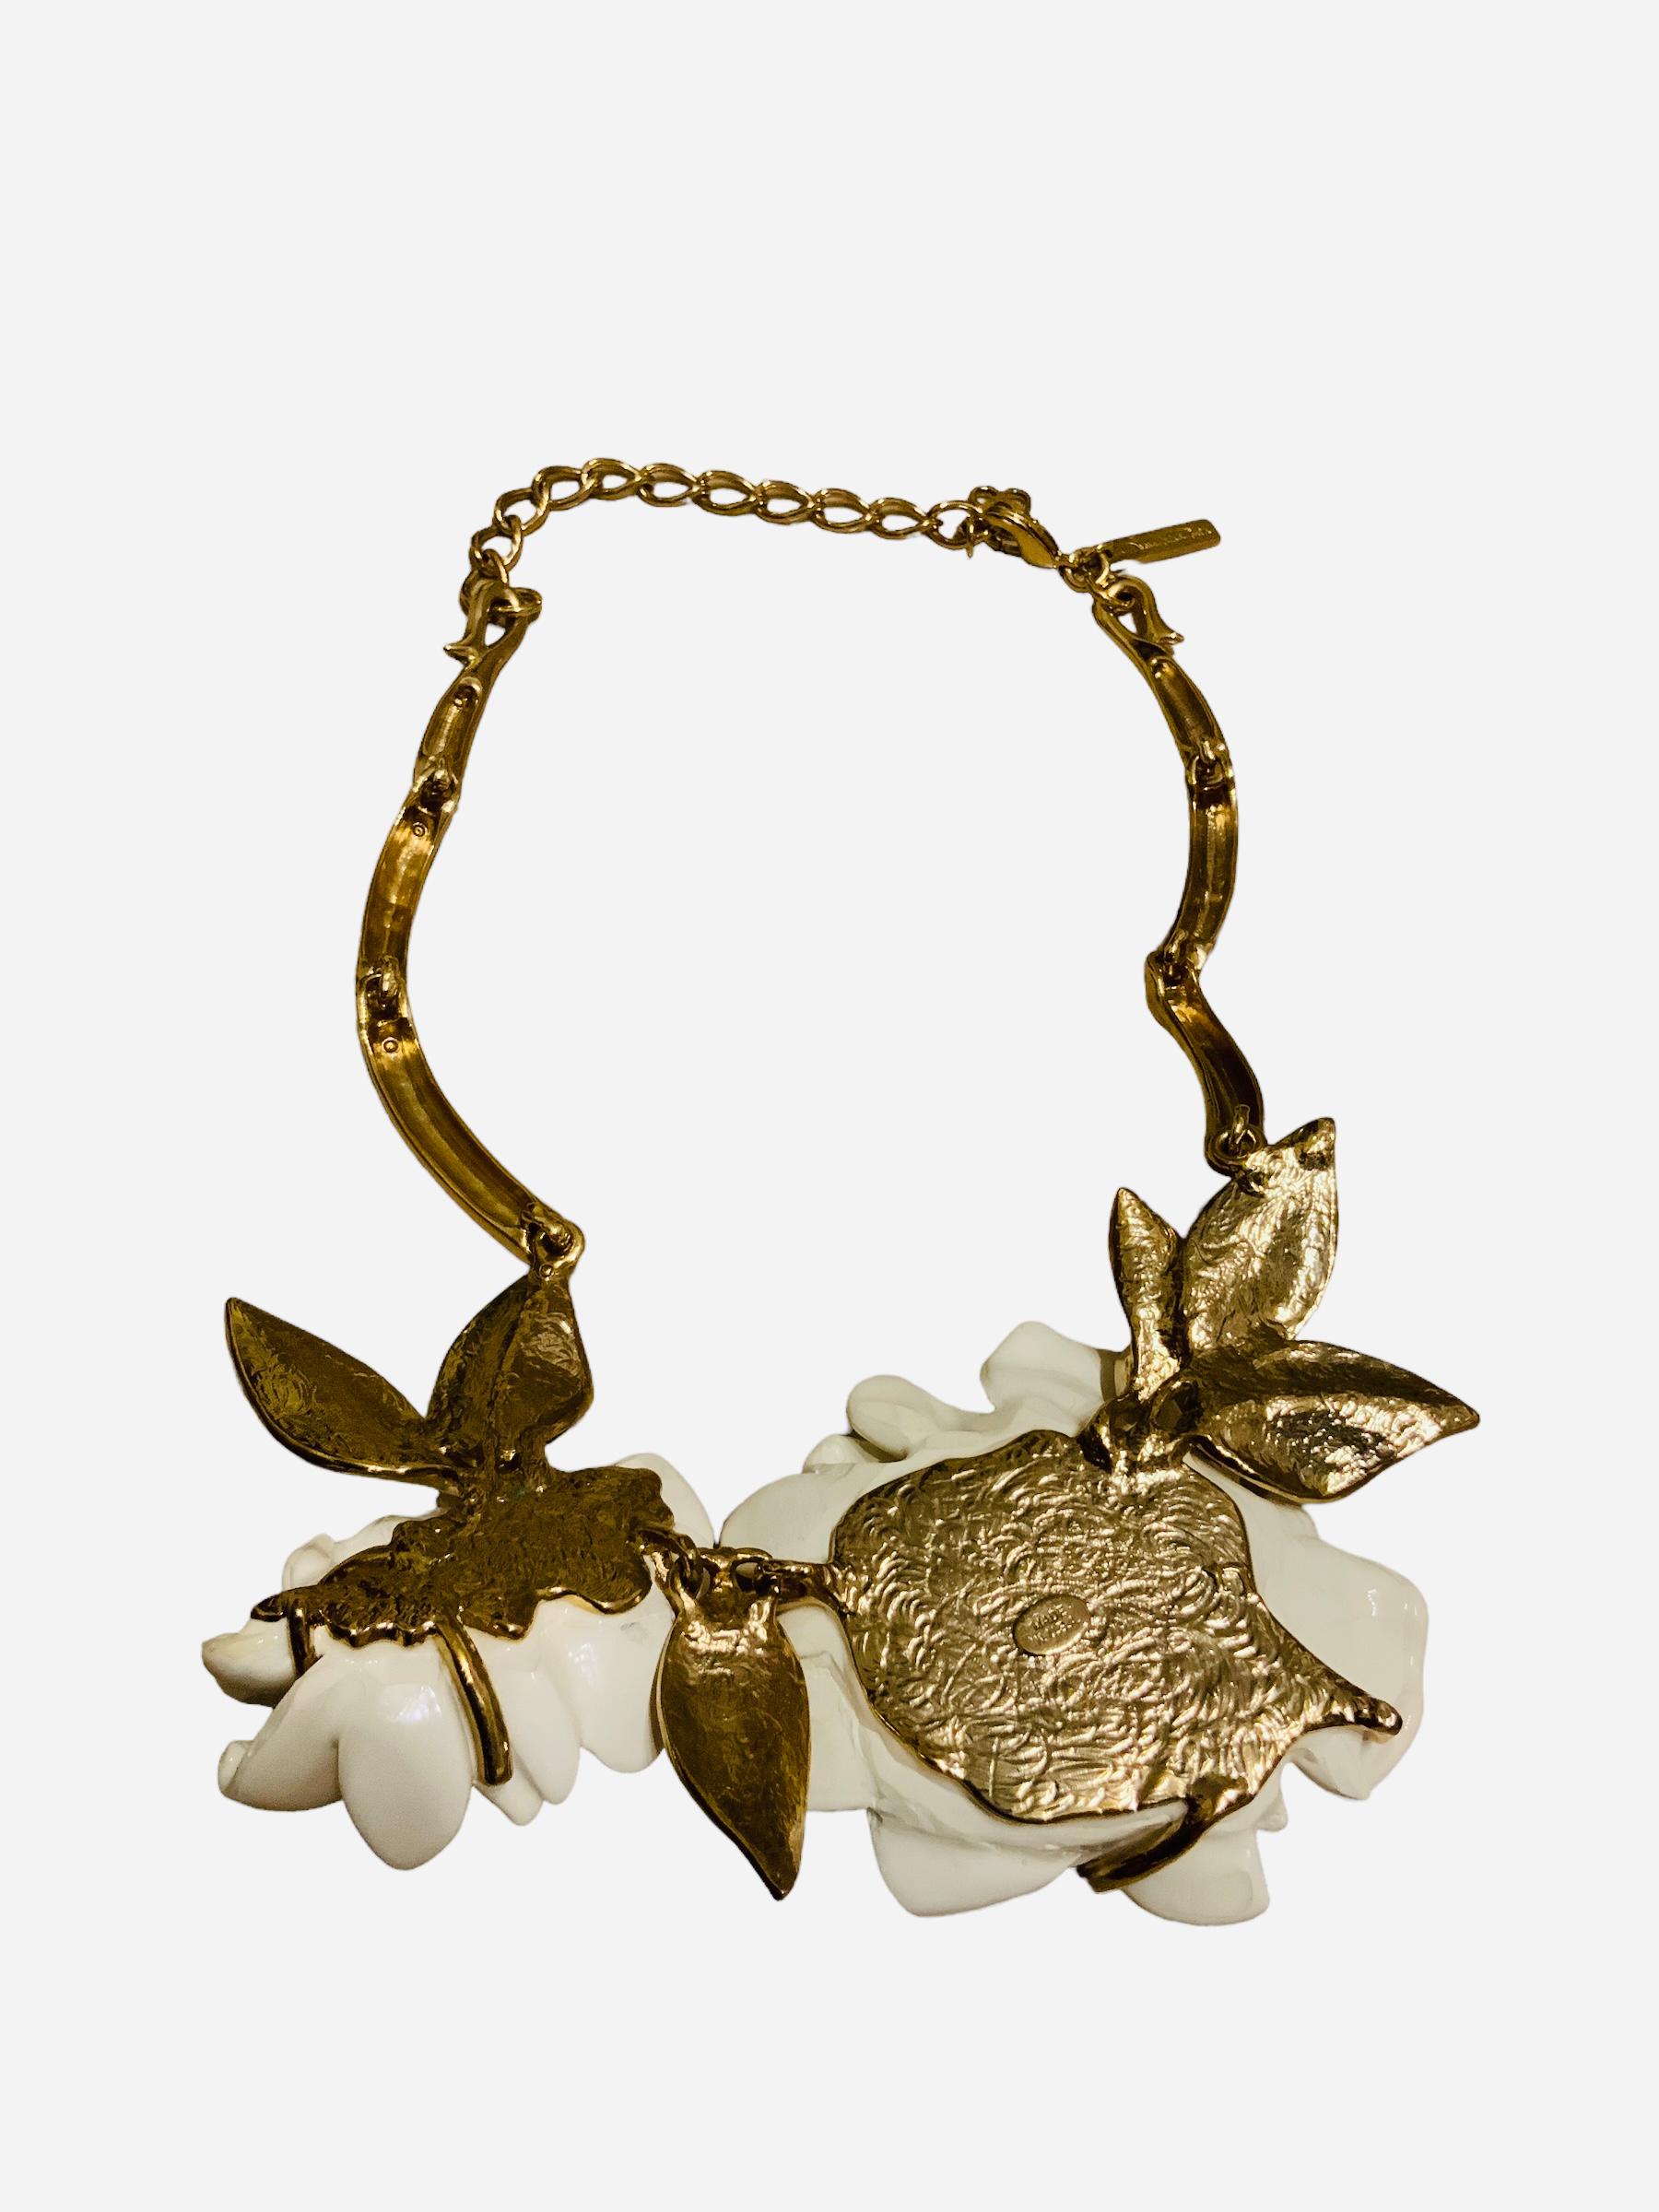 This is an Oscar de la Renta gold plated choker-chain necklace. It has long gold plated bar links that end with a bouquet of two ivory color resin Camellias flowers with leaves adorned with rhinestones. It has a gold plated tag hallmarked Oscar de